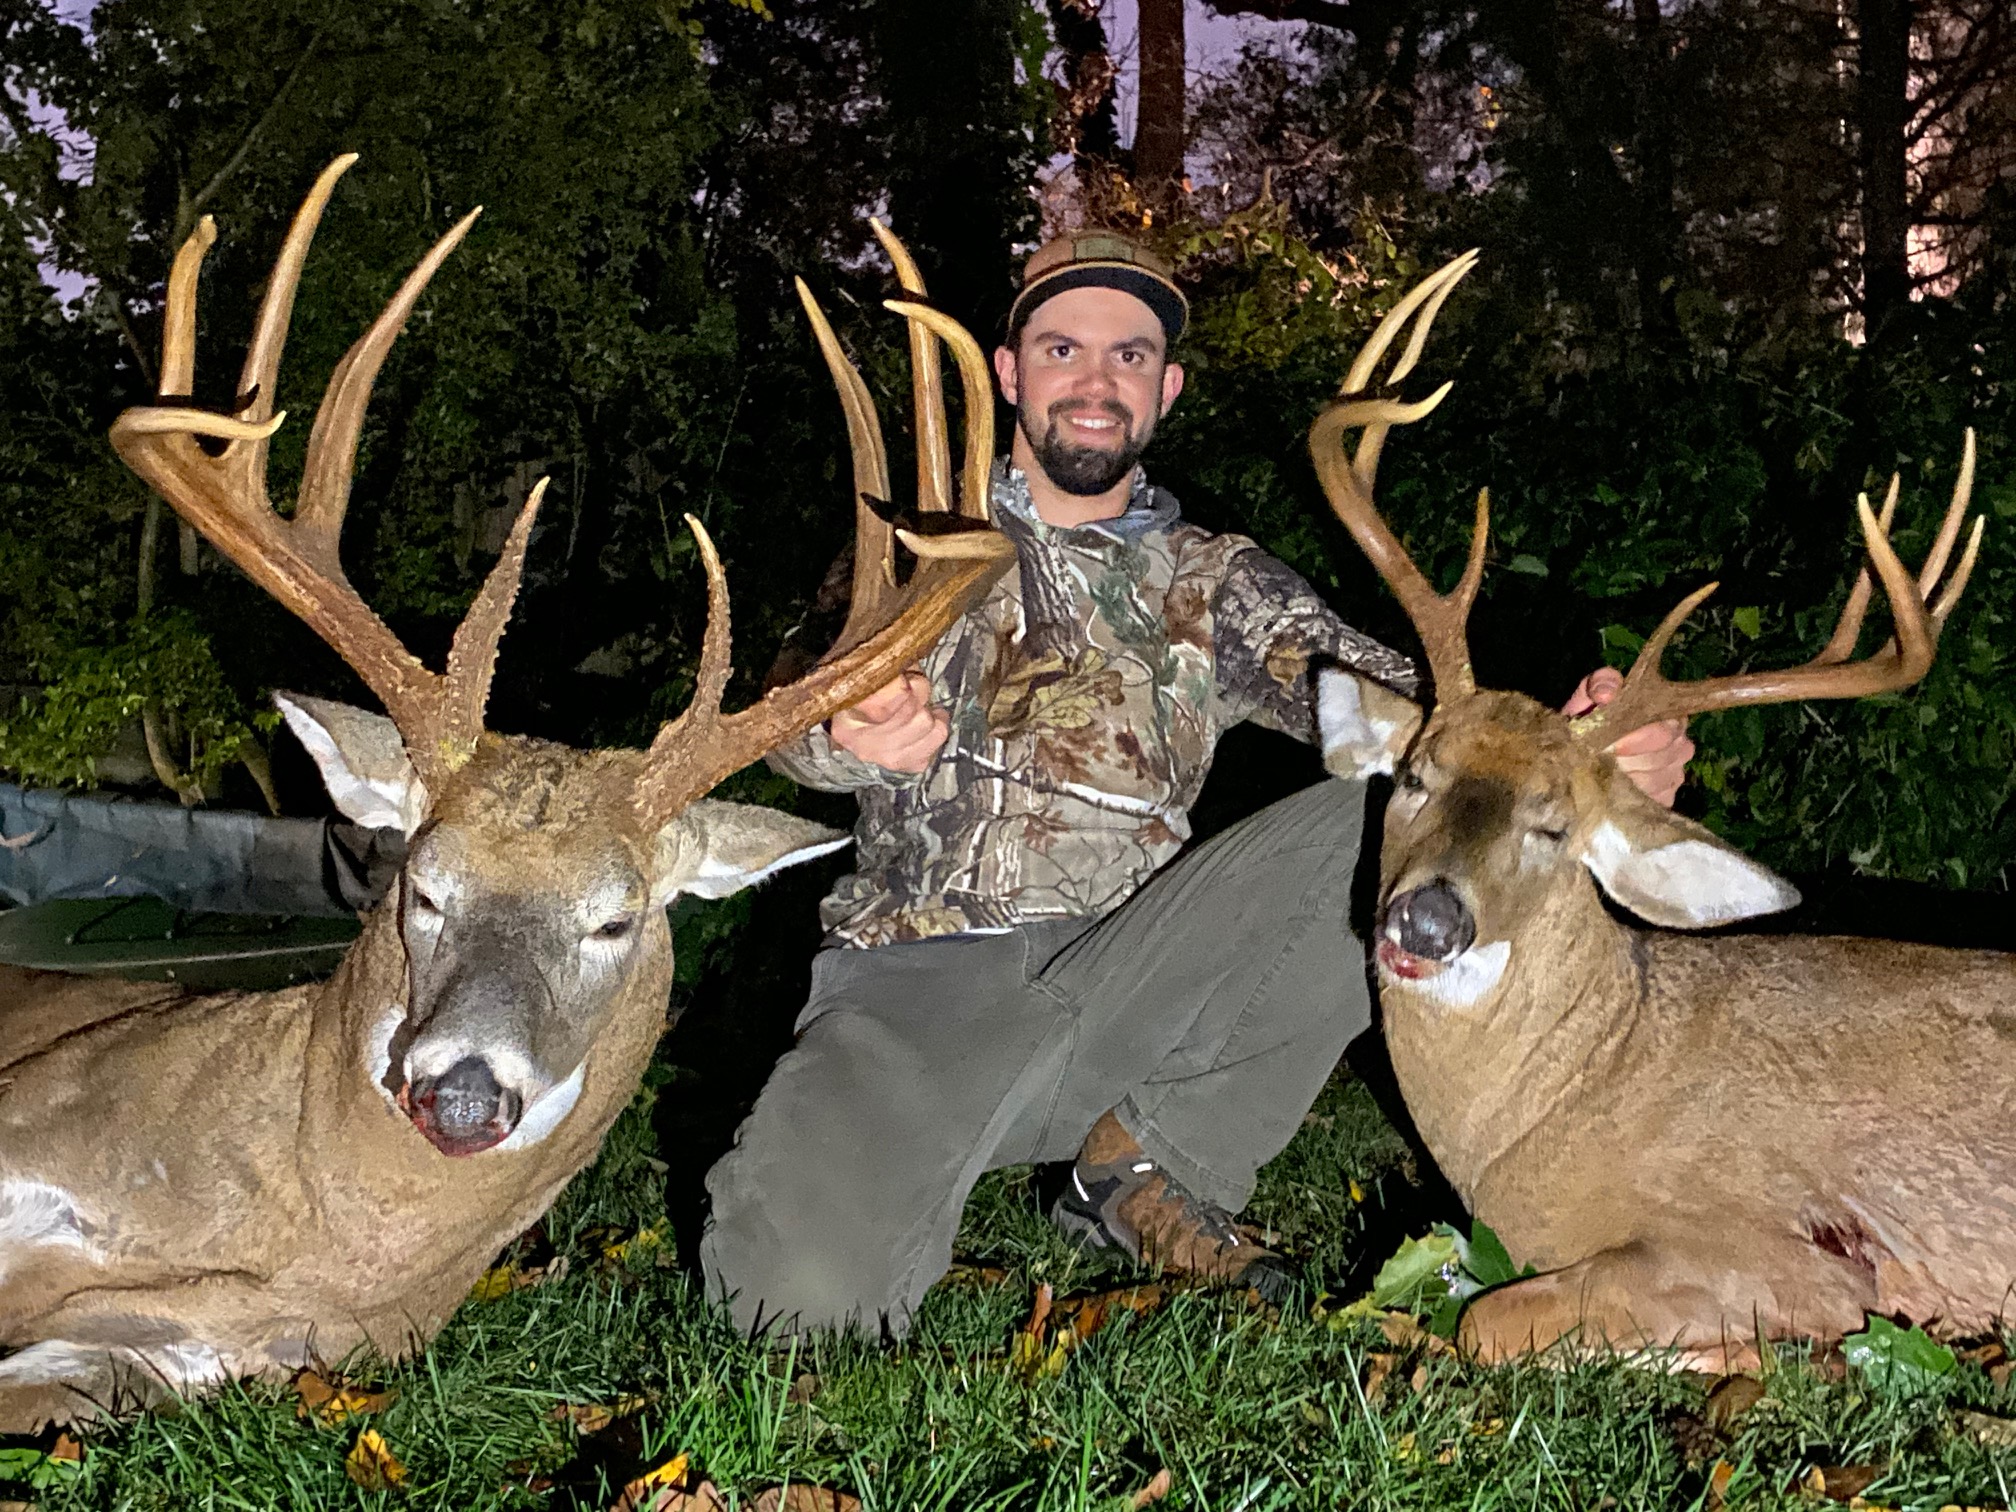 Dieter Herbert arrowed a 130 class buck (right) just minutes before shooting one of the biggest typical whitetails in New York history.